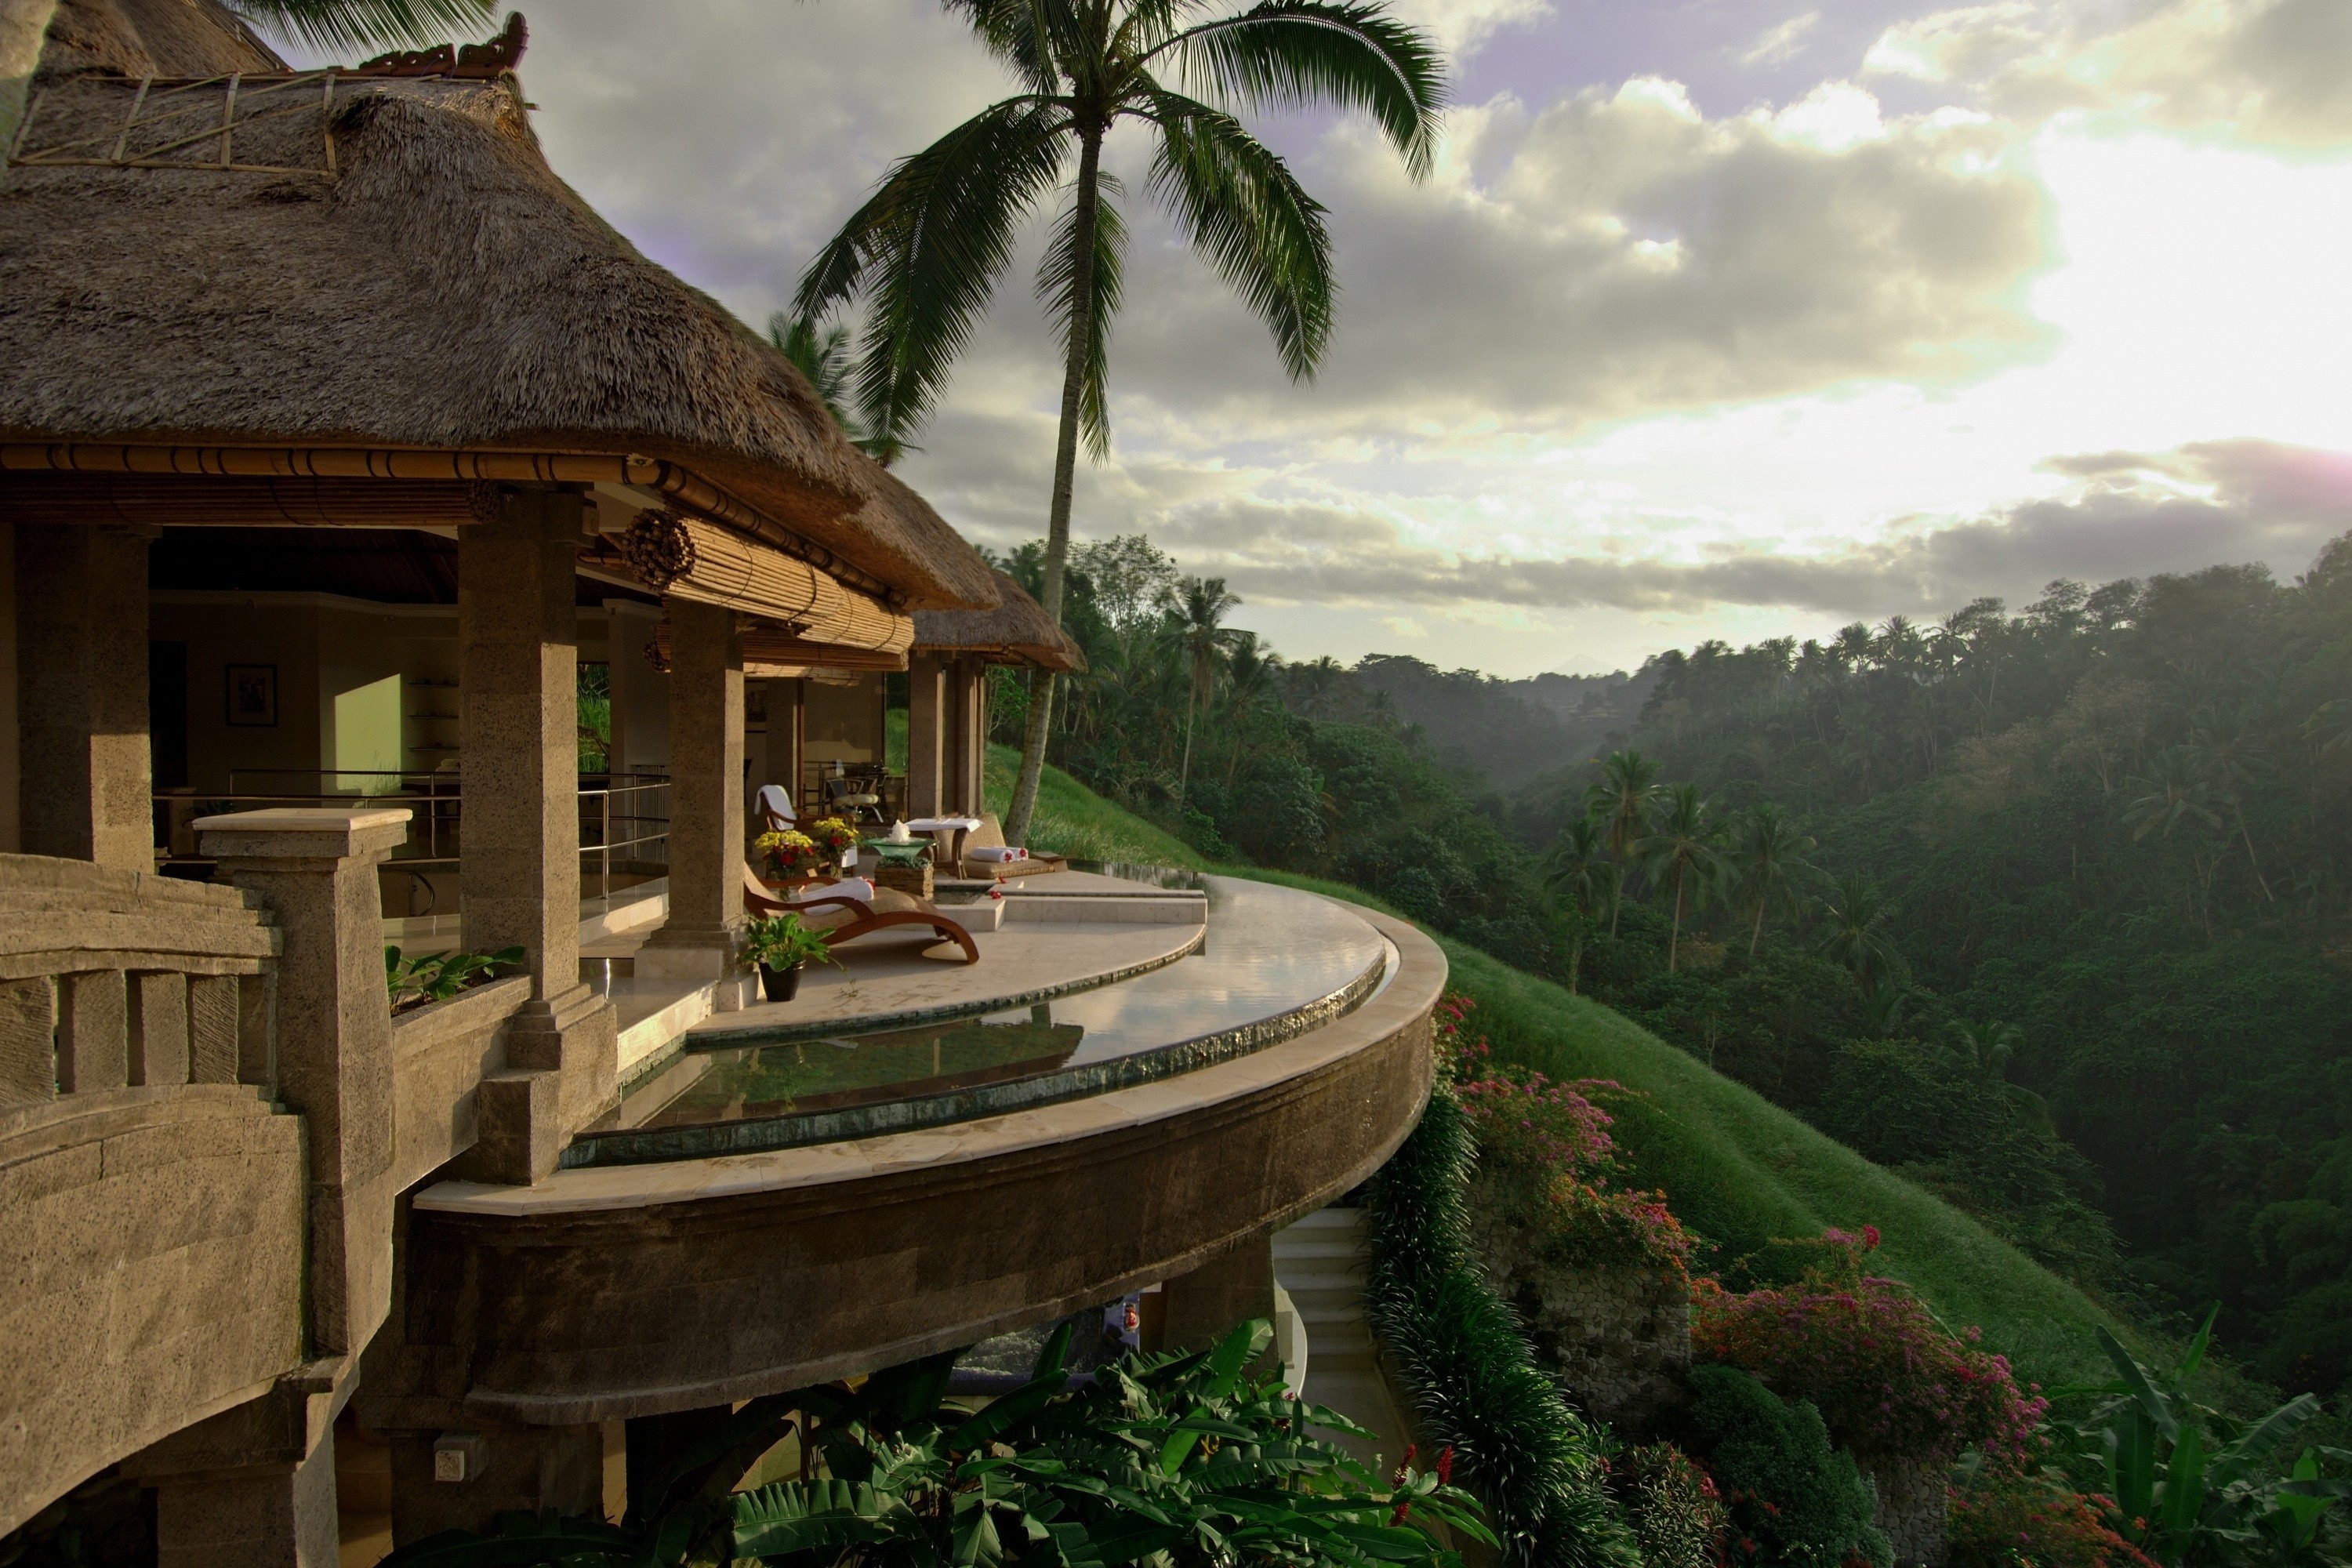 balcony, paradise, handsomely, house, it's beautiful, miscellanea, miscellaneous, nature, palms